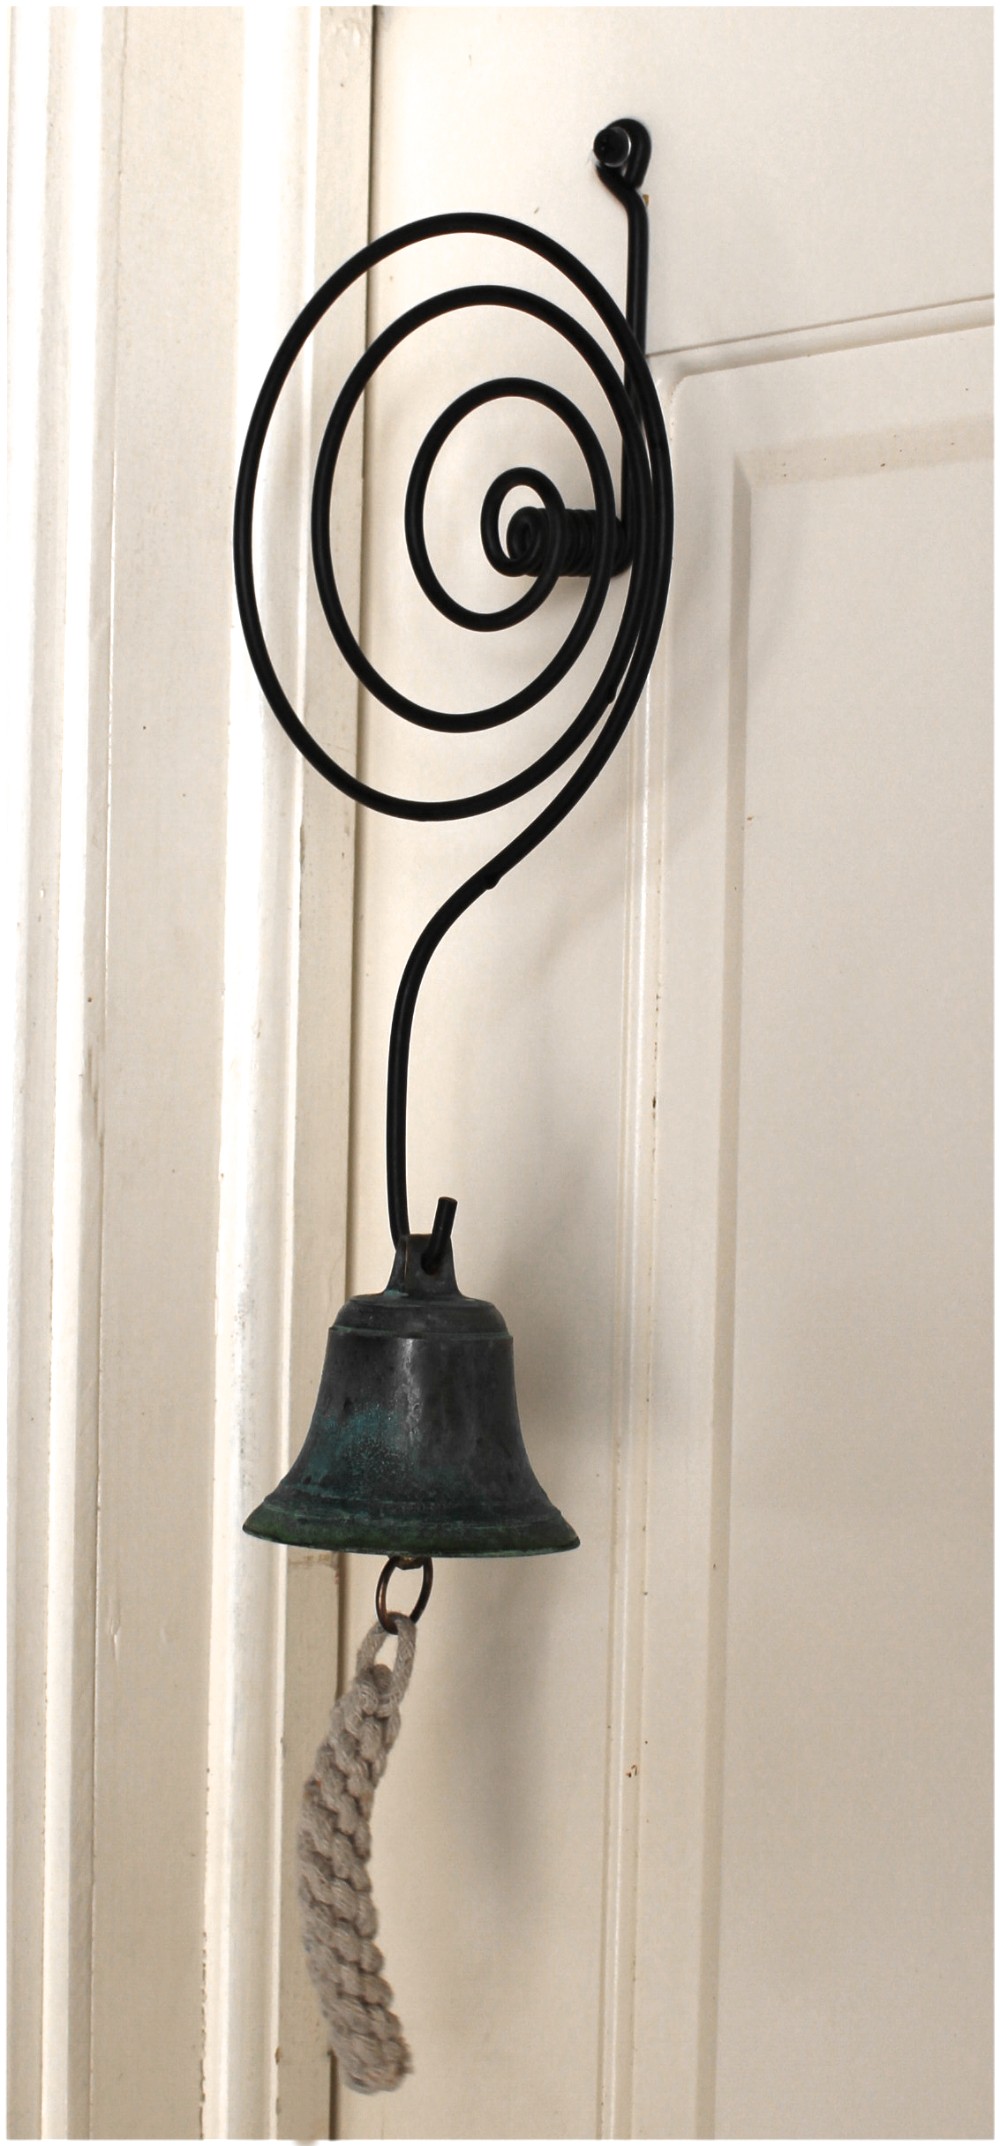 Shop Keepers Bell Door springing old fashioned store antique vintage replica old